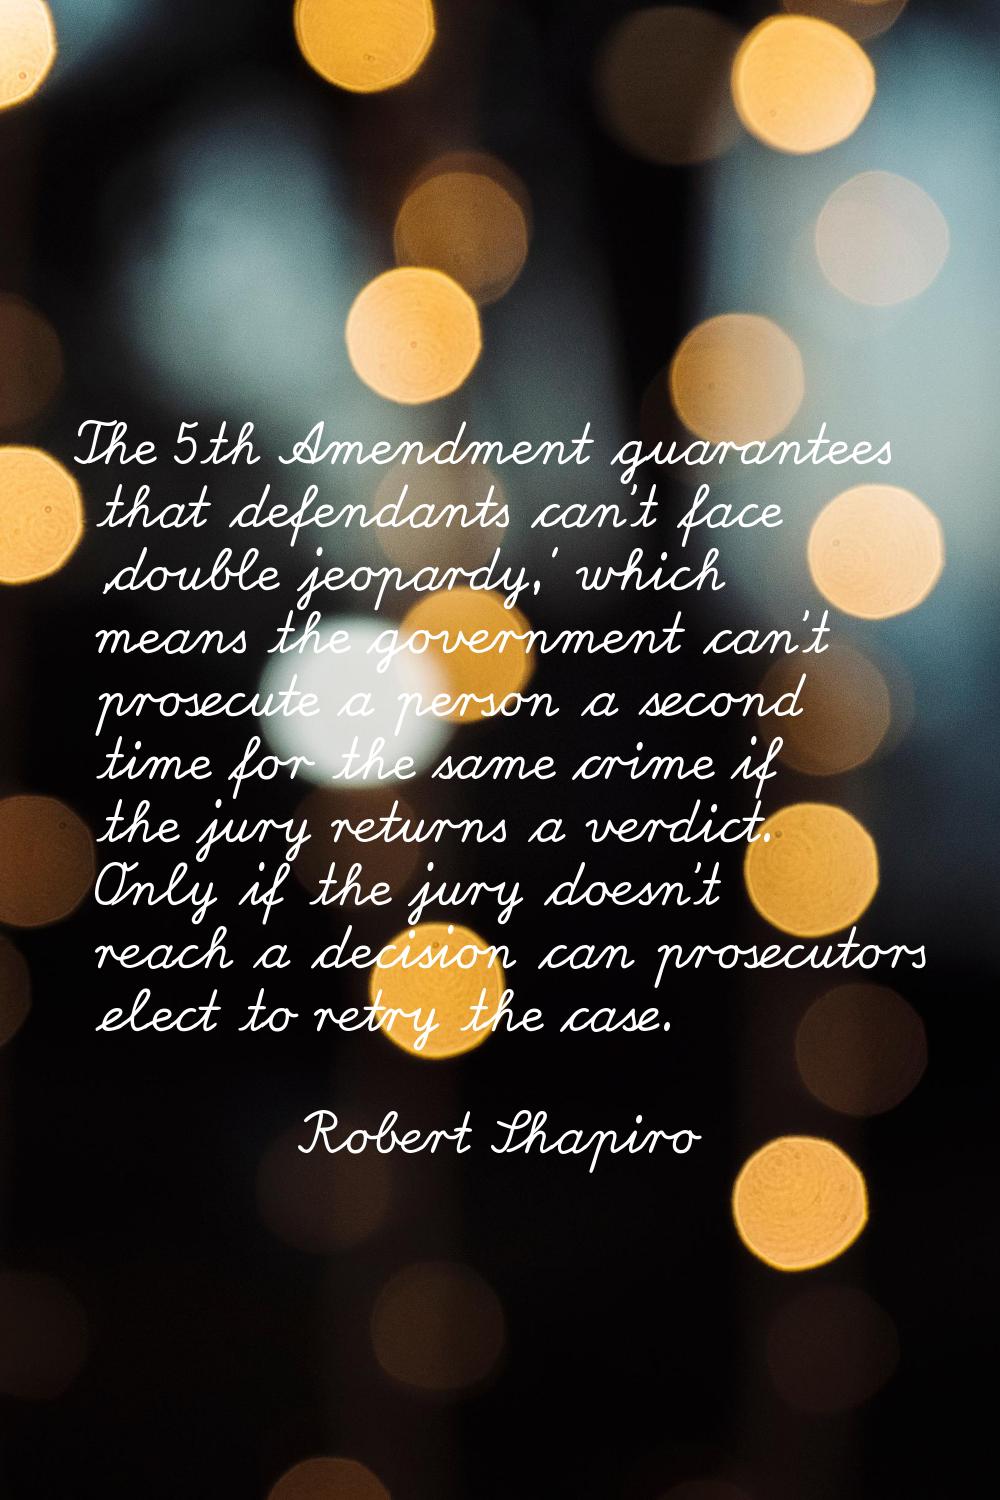 The 5th Amendment guarantees that defendants can't face 'double jeopardy,' which means the governme